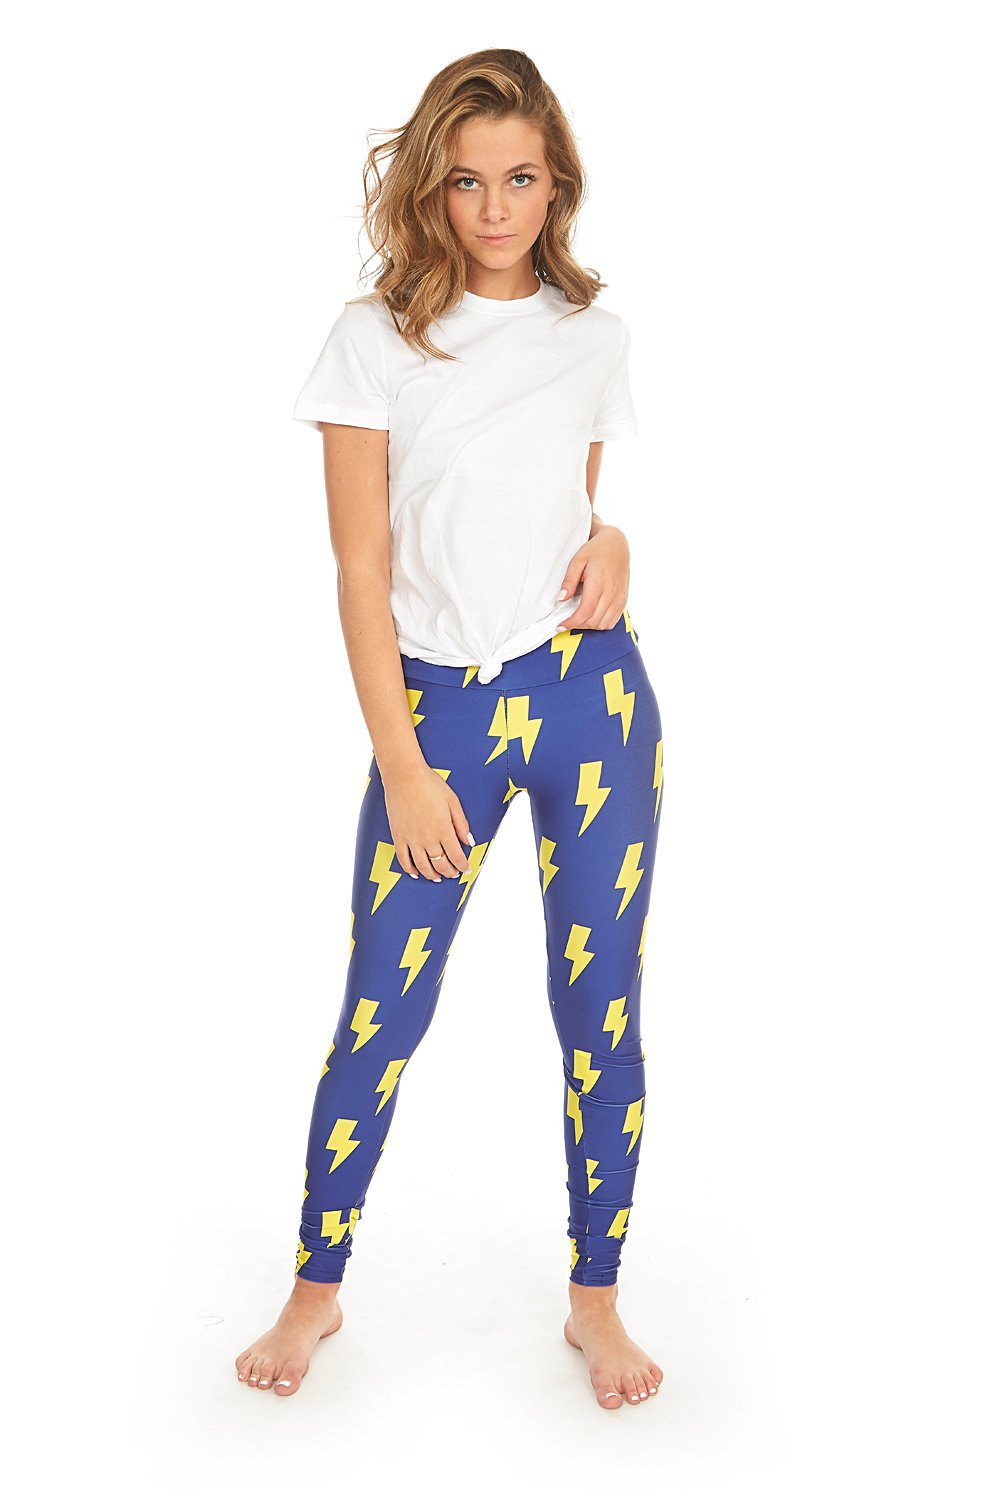 Blue & Yellow Lightning Bolts Leggings – CoreyPaigeDesigns